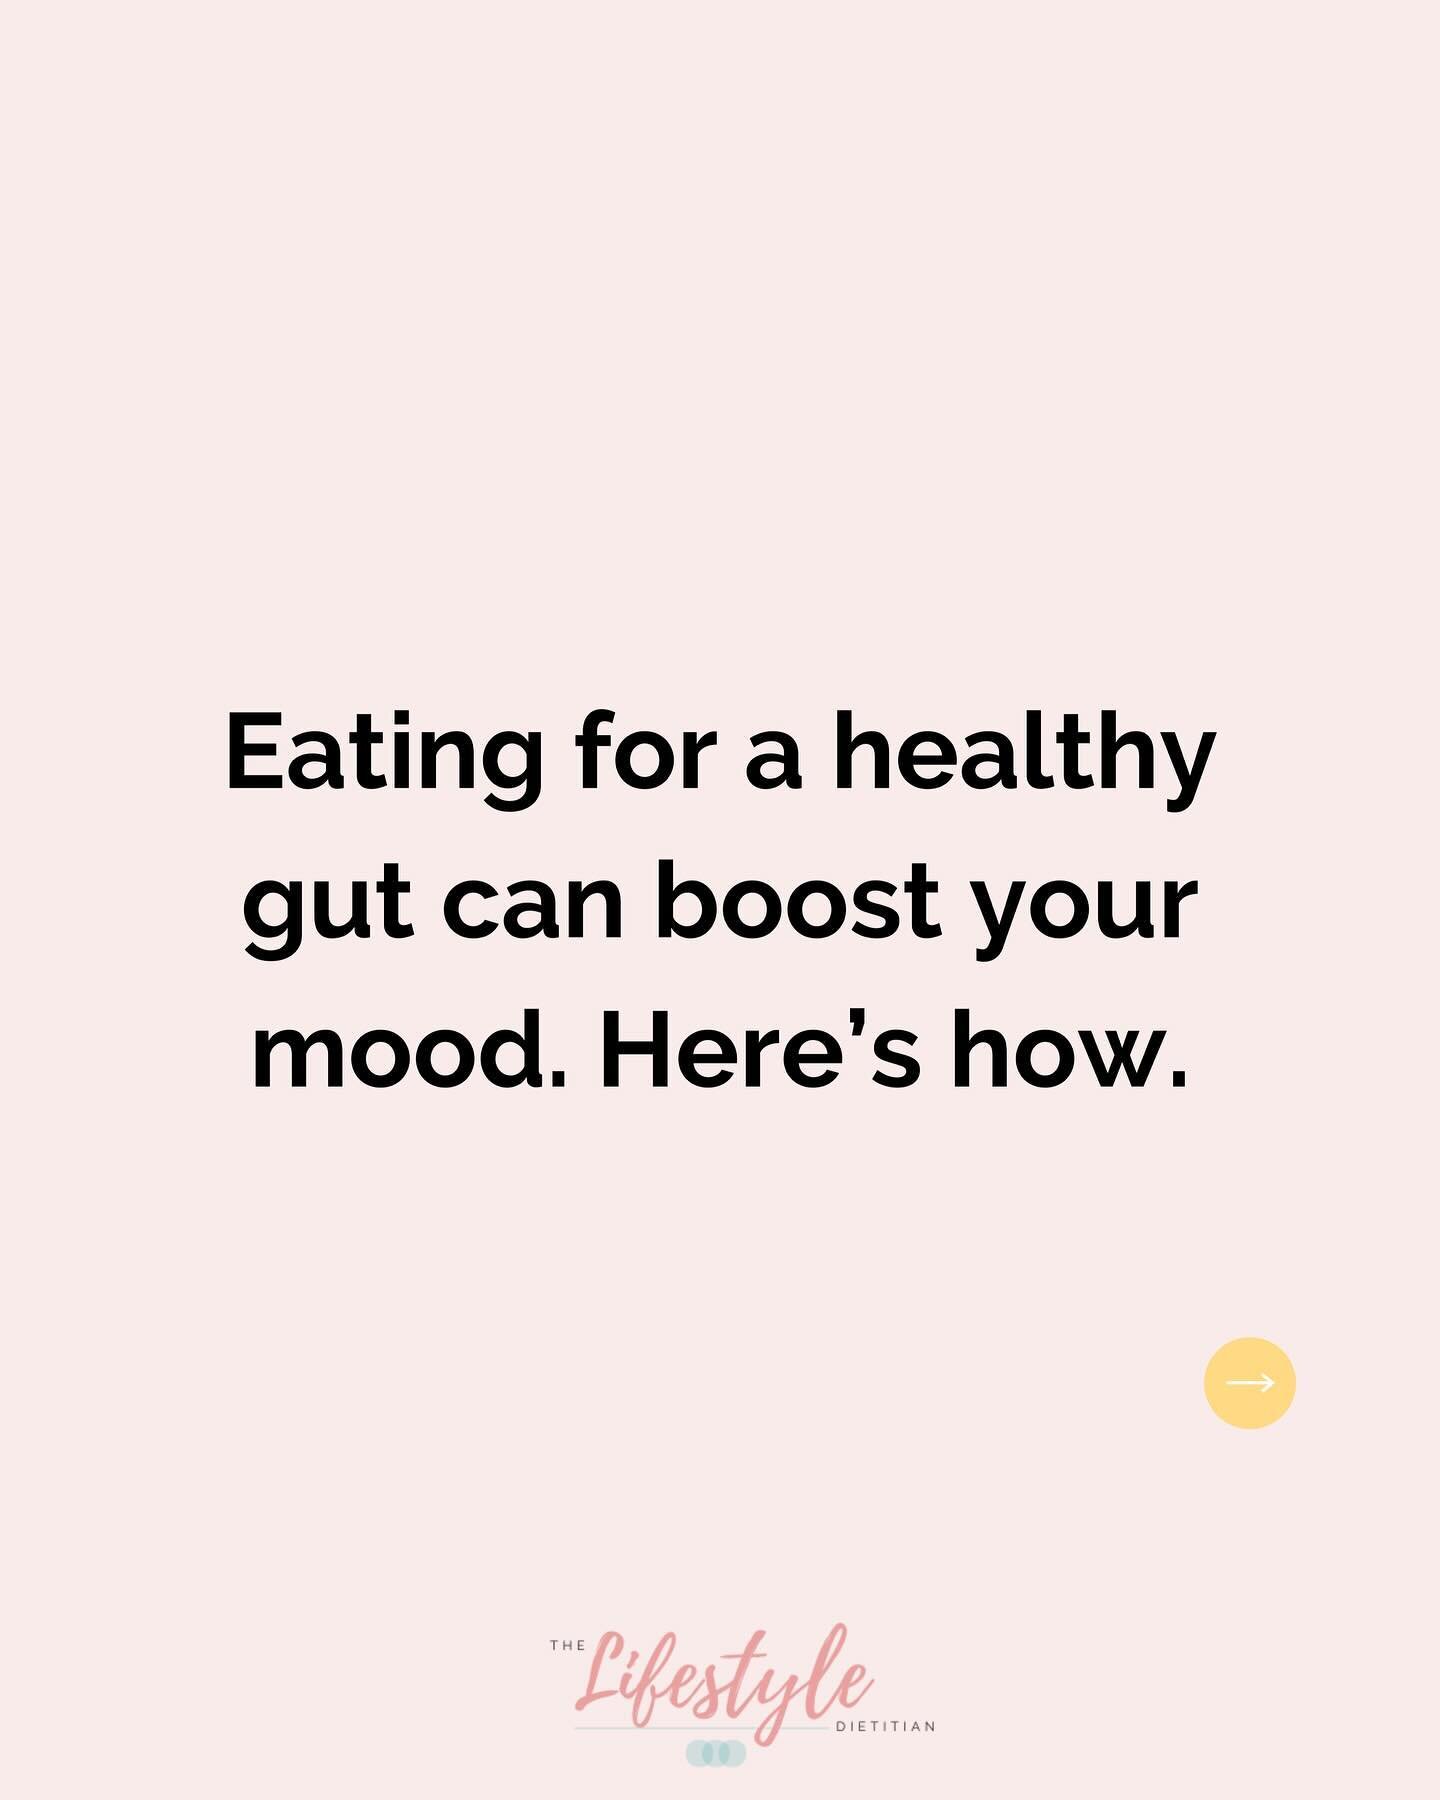 Plot twist: boosting your mental health starts with gut health. And the best diet to dish up?

The Mediterranean Diet ✅

Because it&rsquo;s filled with the very foods your gut microbes love. Legumes! Whole grains! Extra virgin olive oil! Fruit and ve